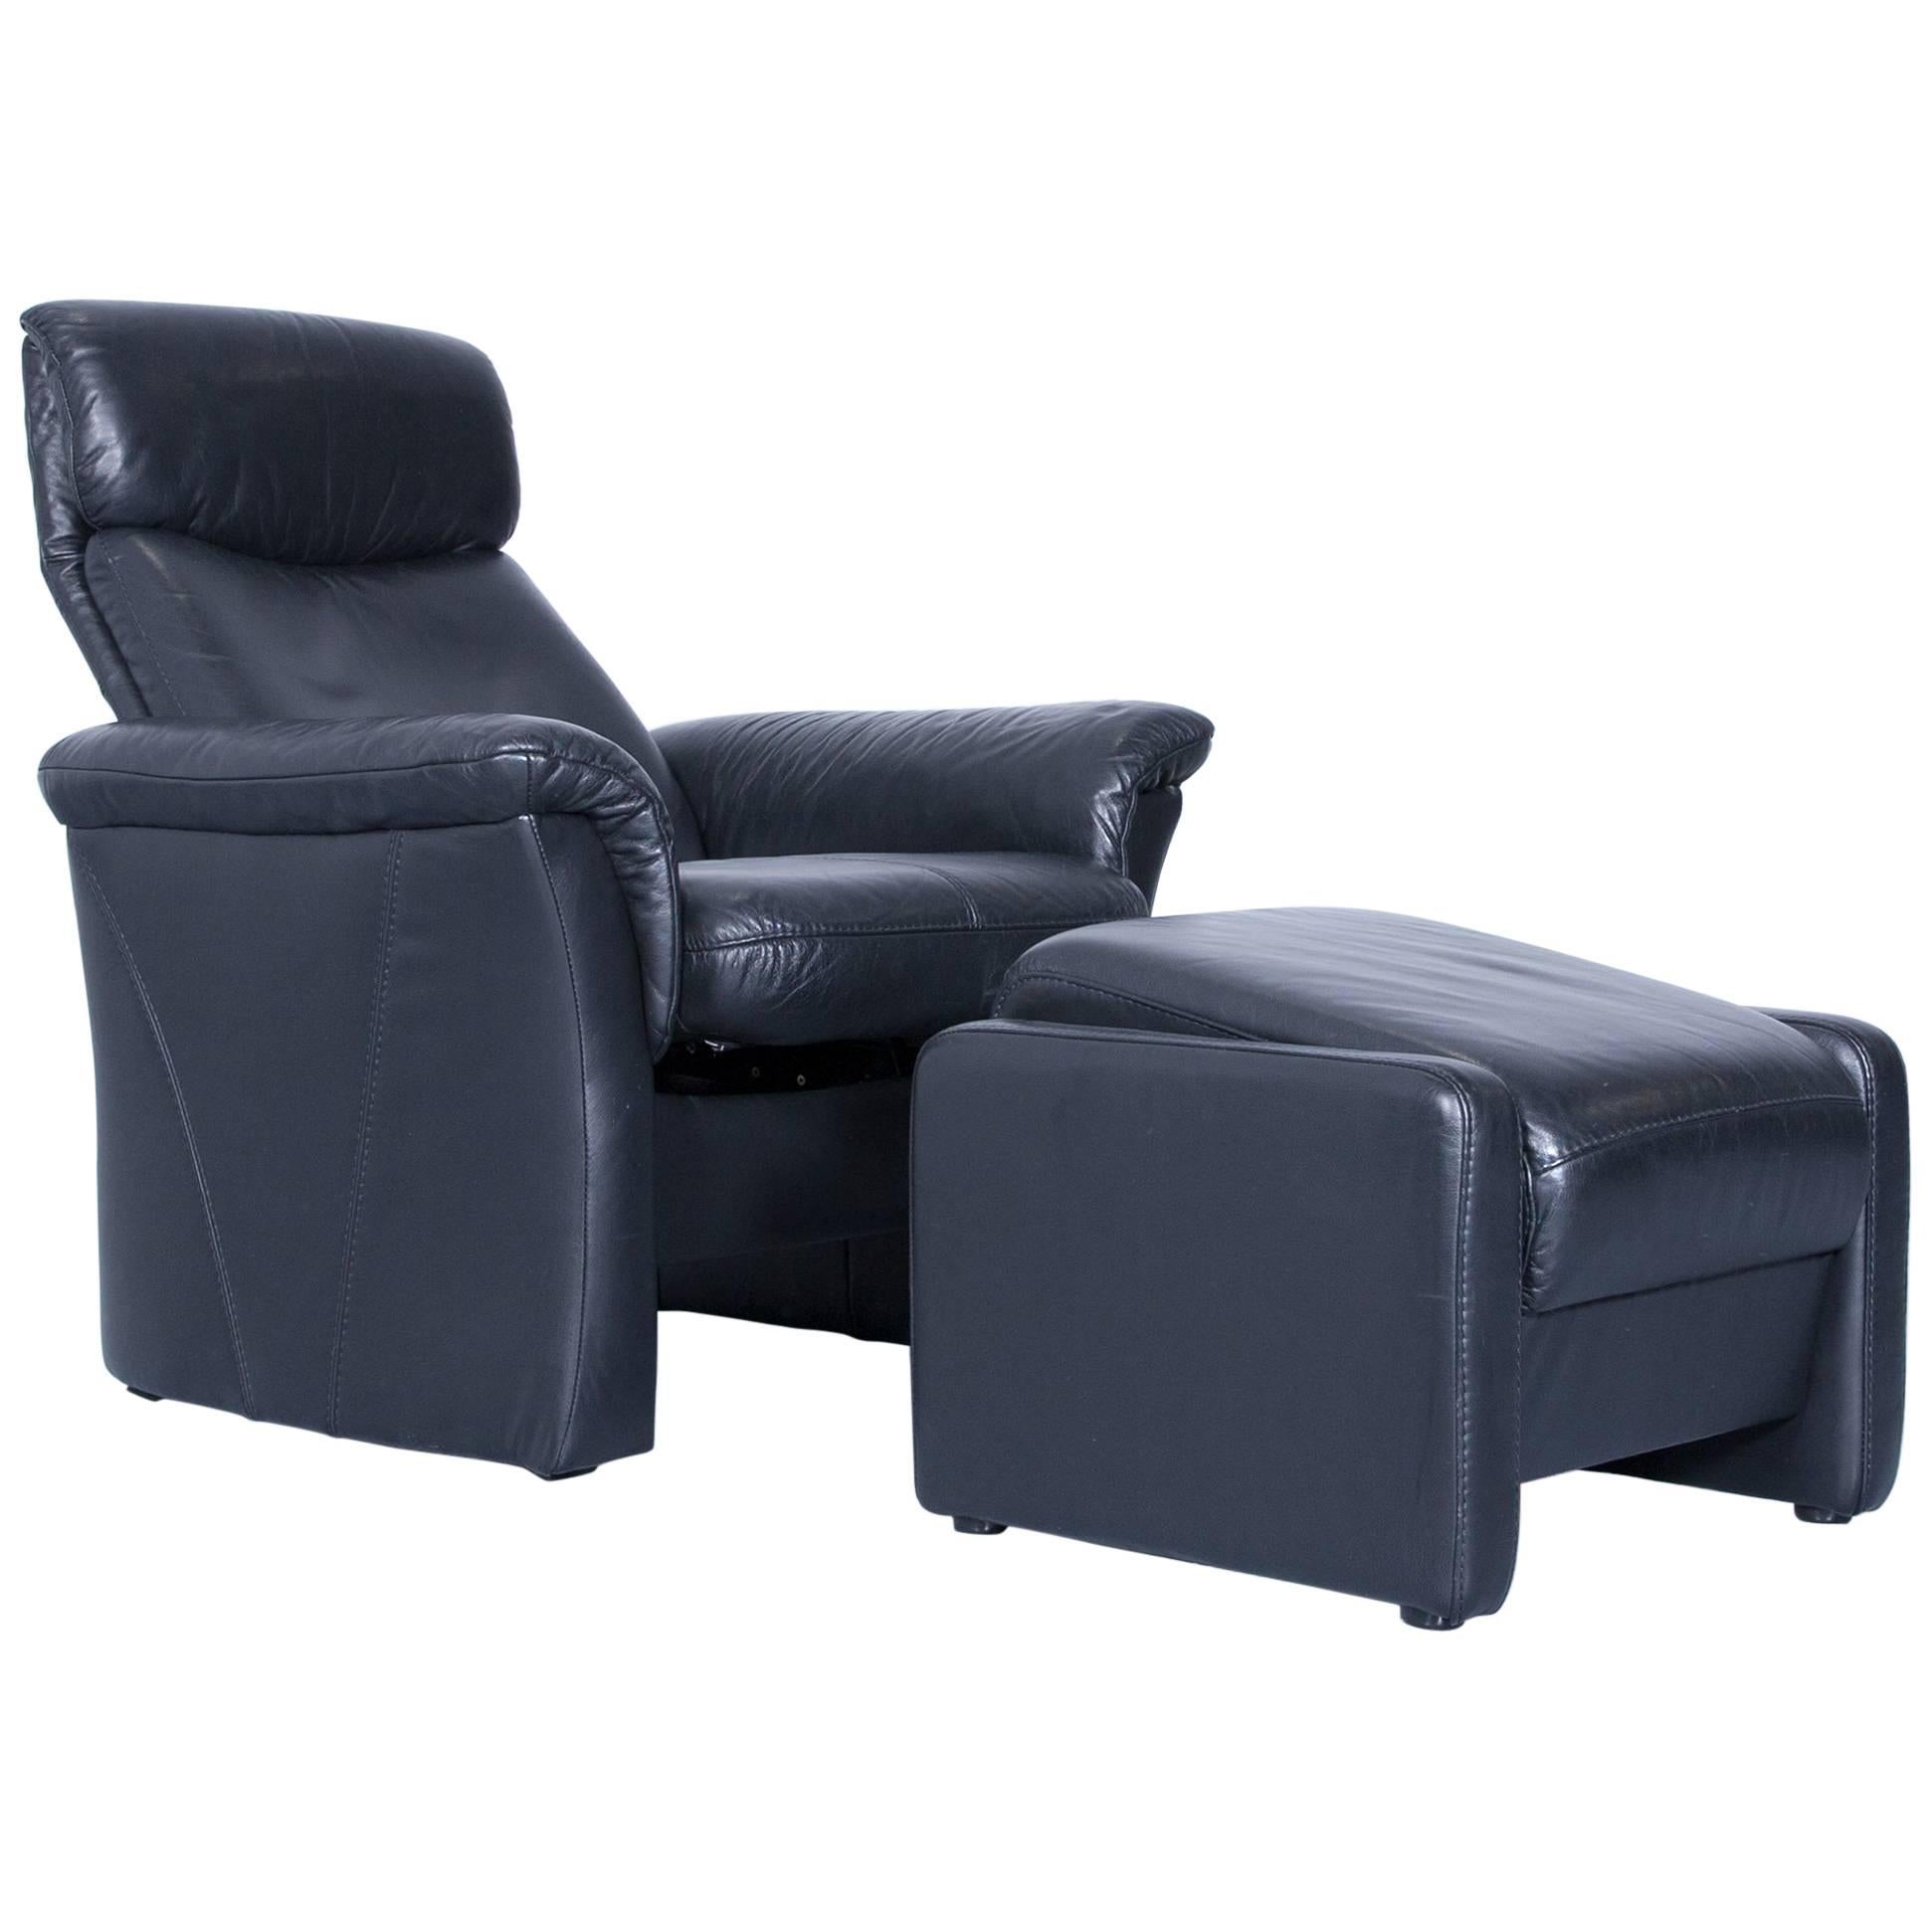 Designer Chair Set Black Leather Relax Function Footstool Pouf Couch Modern